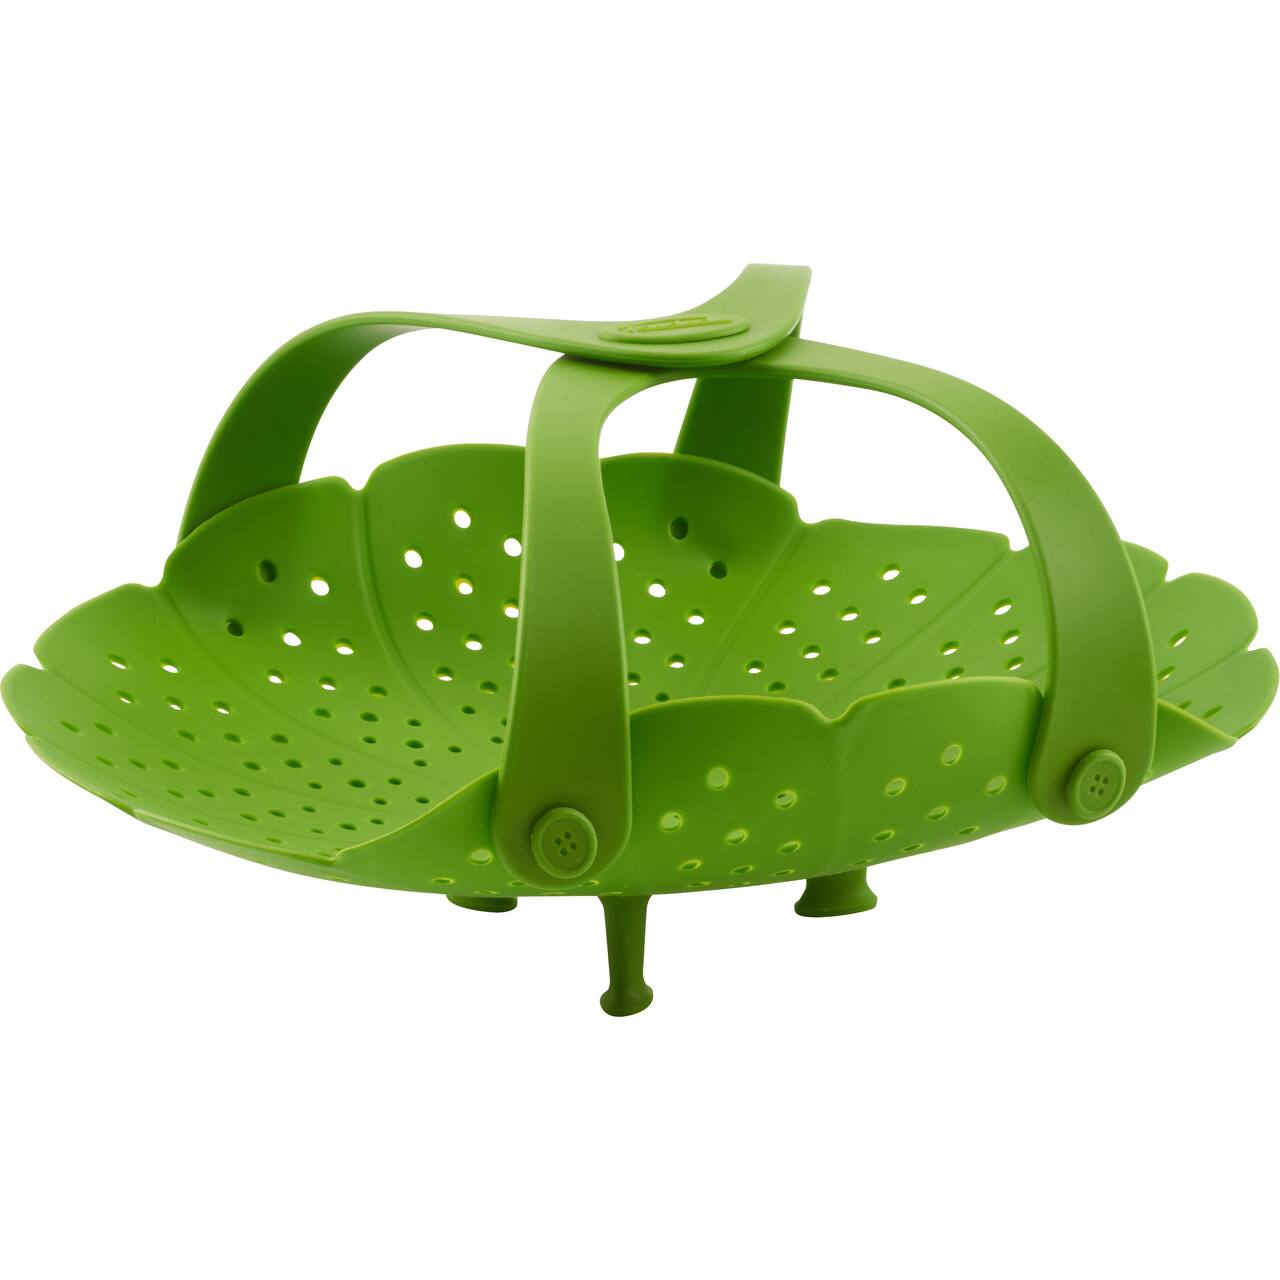 Trudeau® Green Silicone Vegetable Steamer with Handle